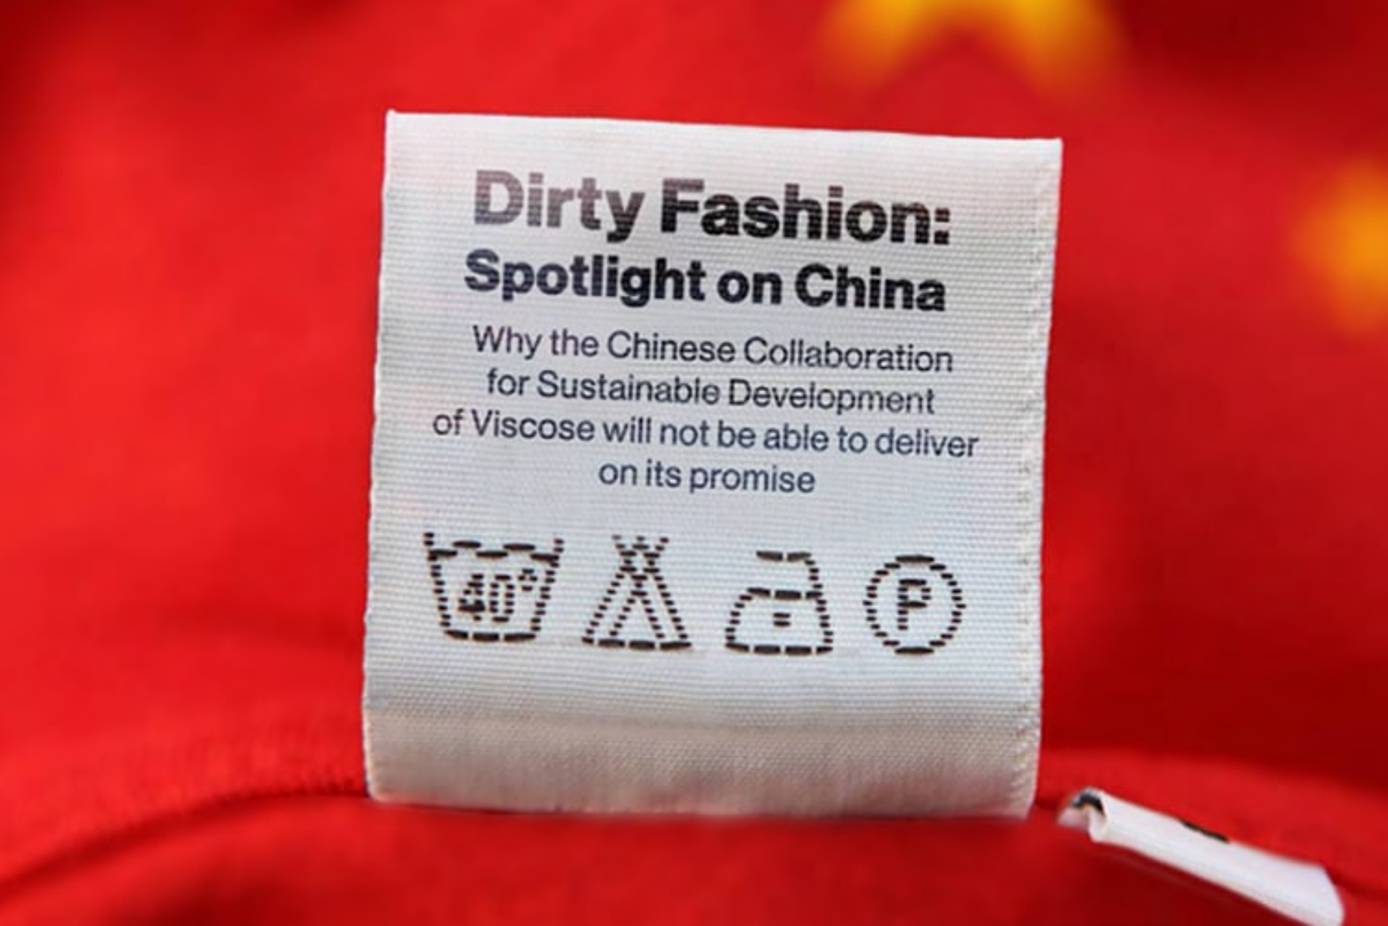 Chinese viscose made with recycled cotton